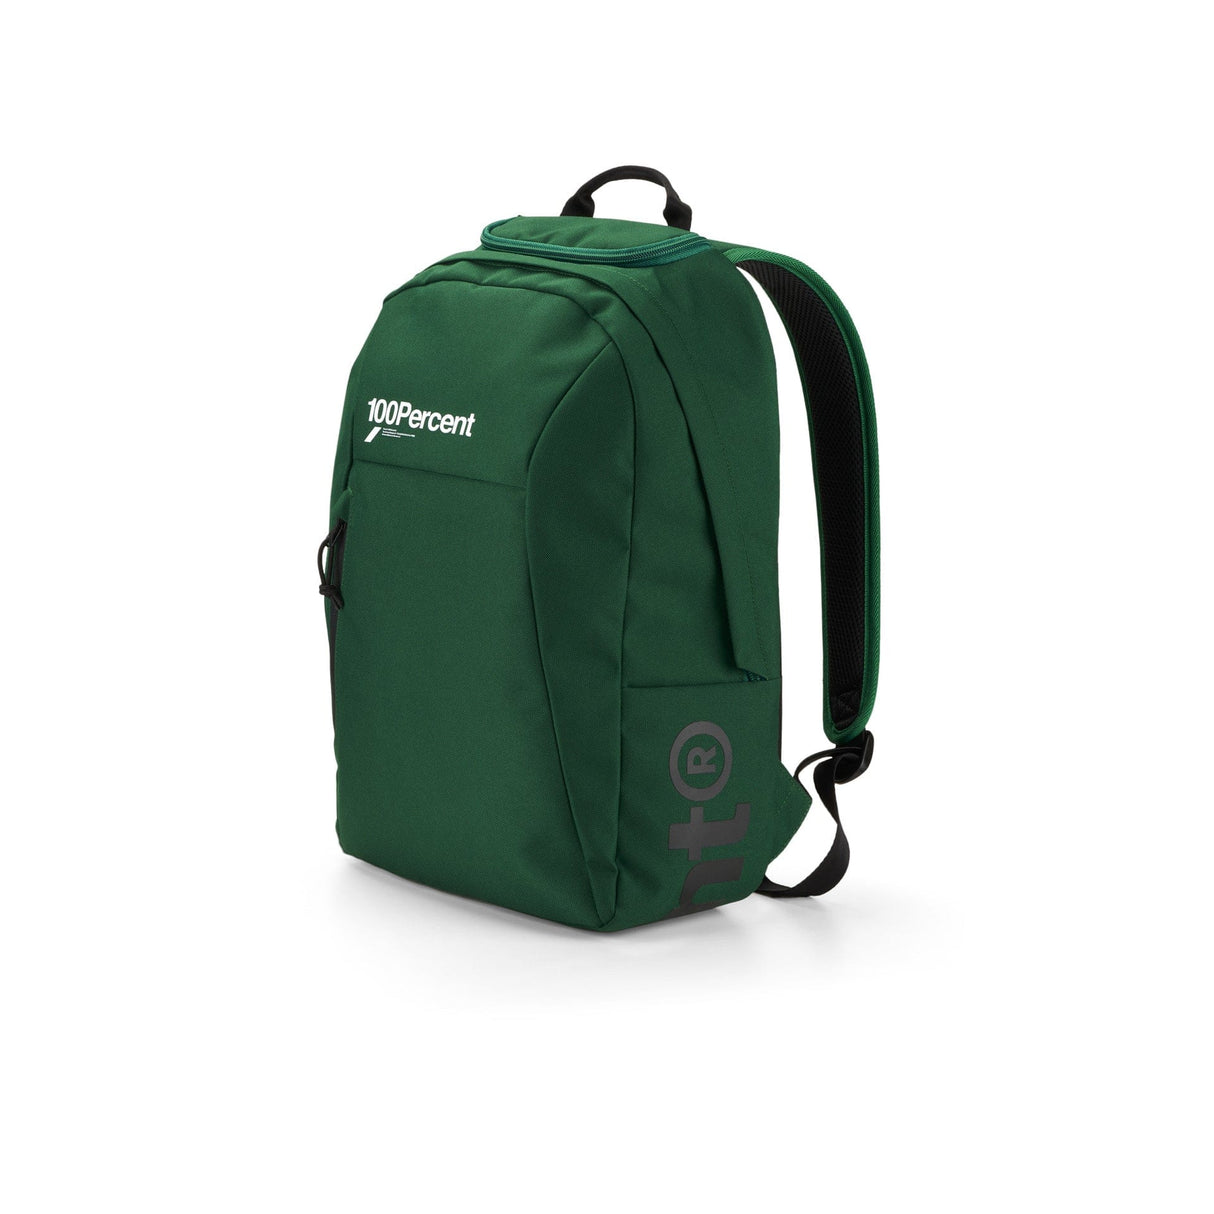 100 Percent SKYCAP Backpack Forest Green